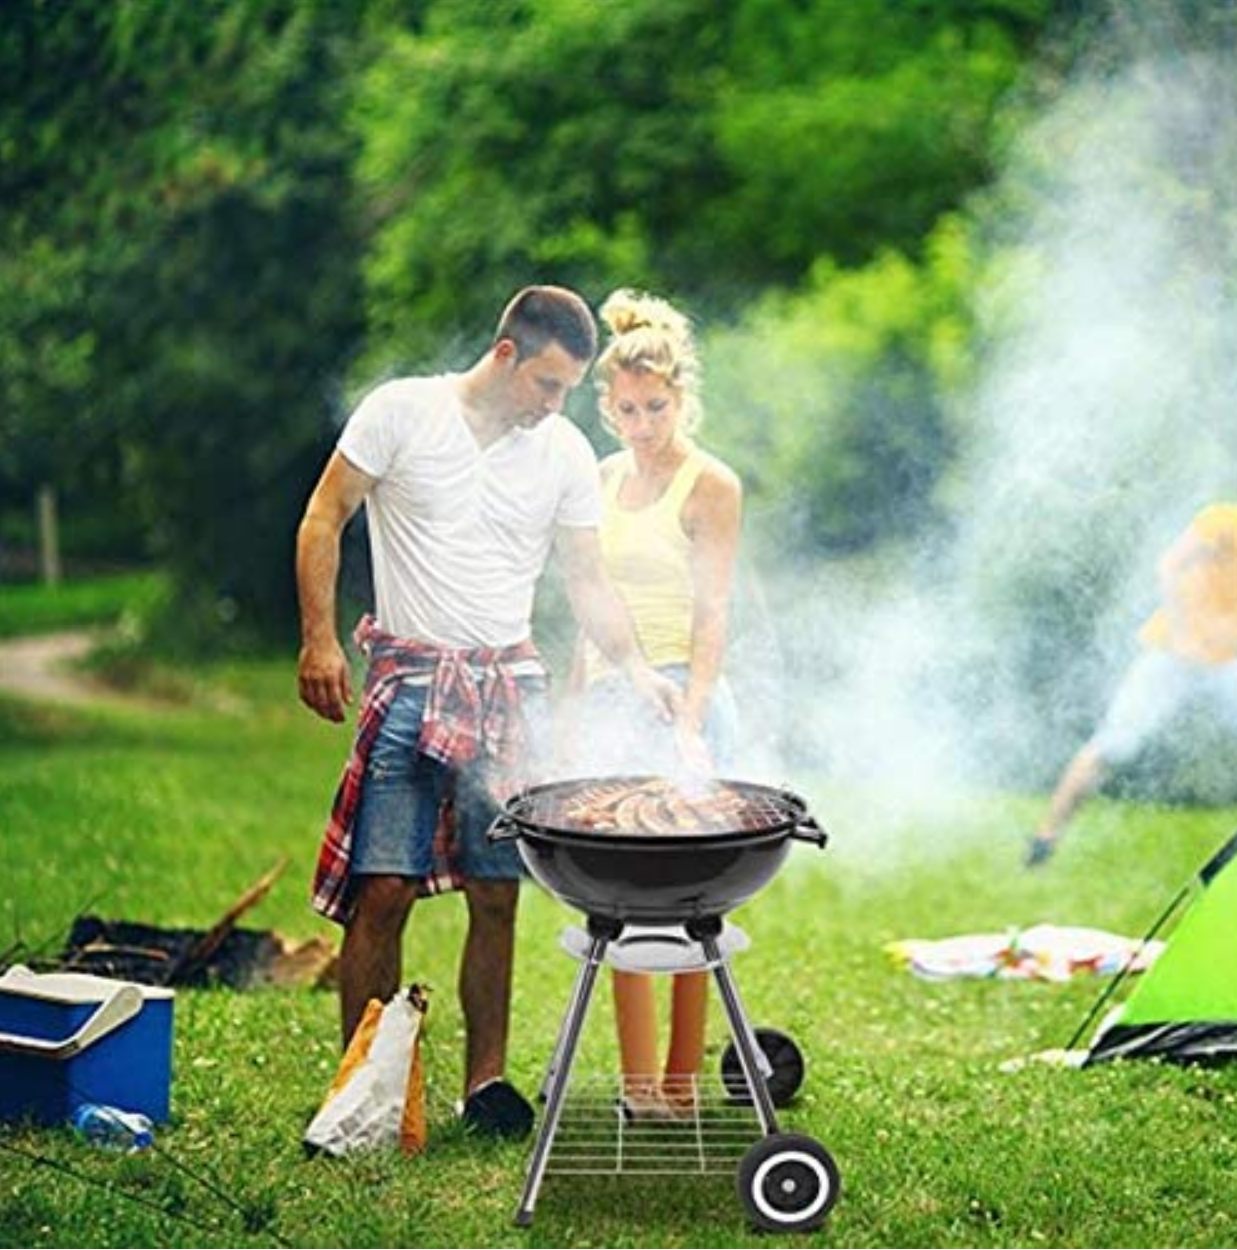 22" Round Portable BBQ Grill - Asador- Charcoal Grill